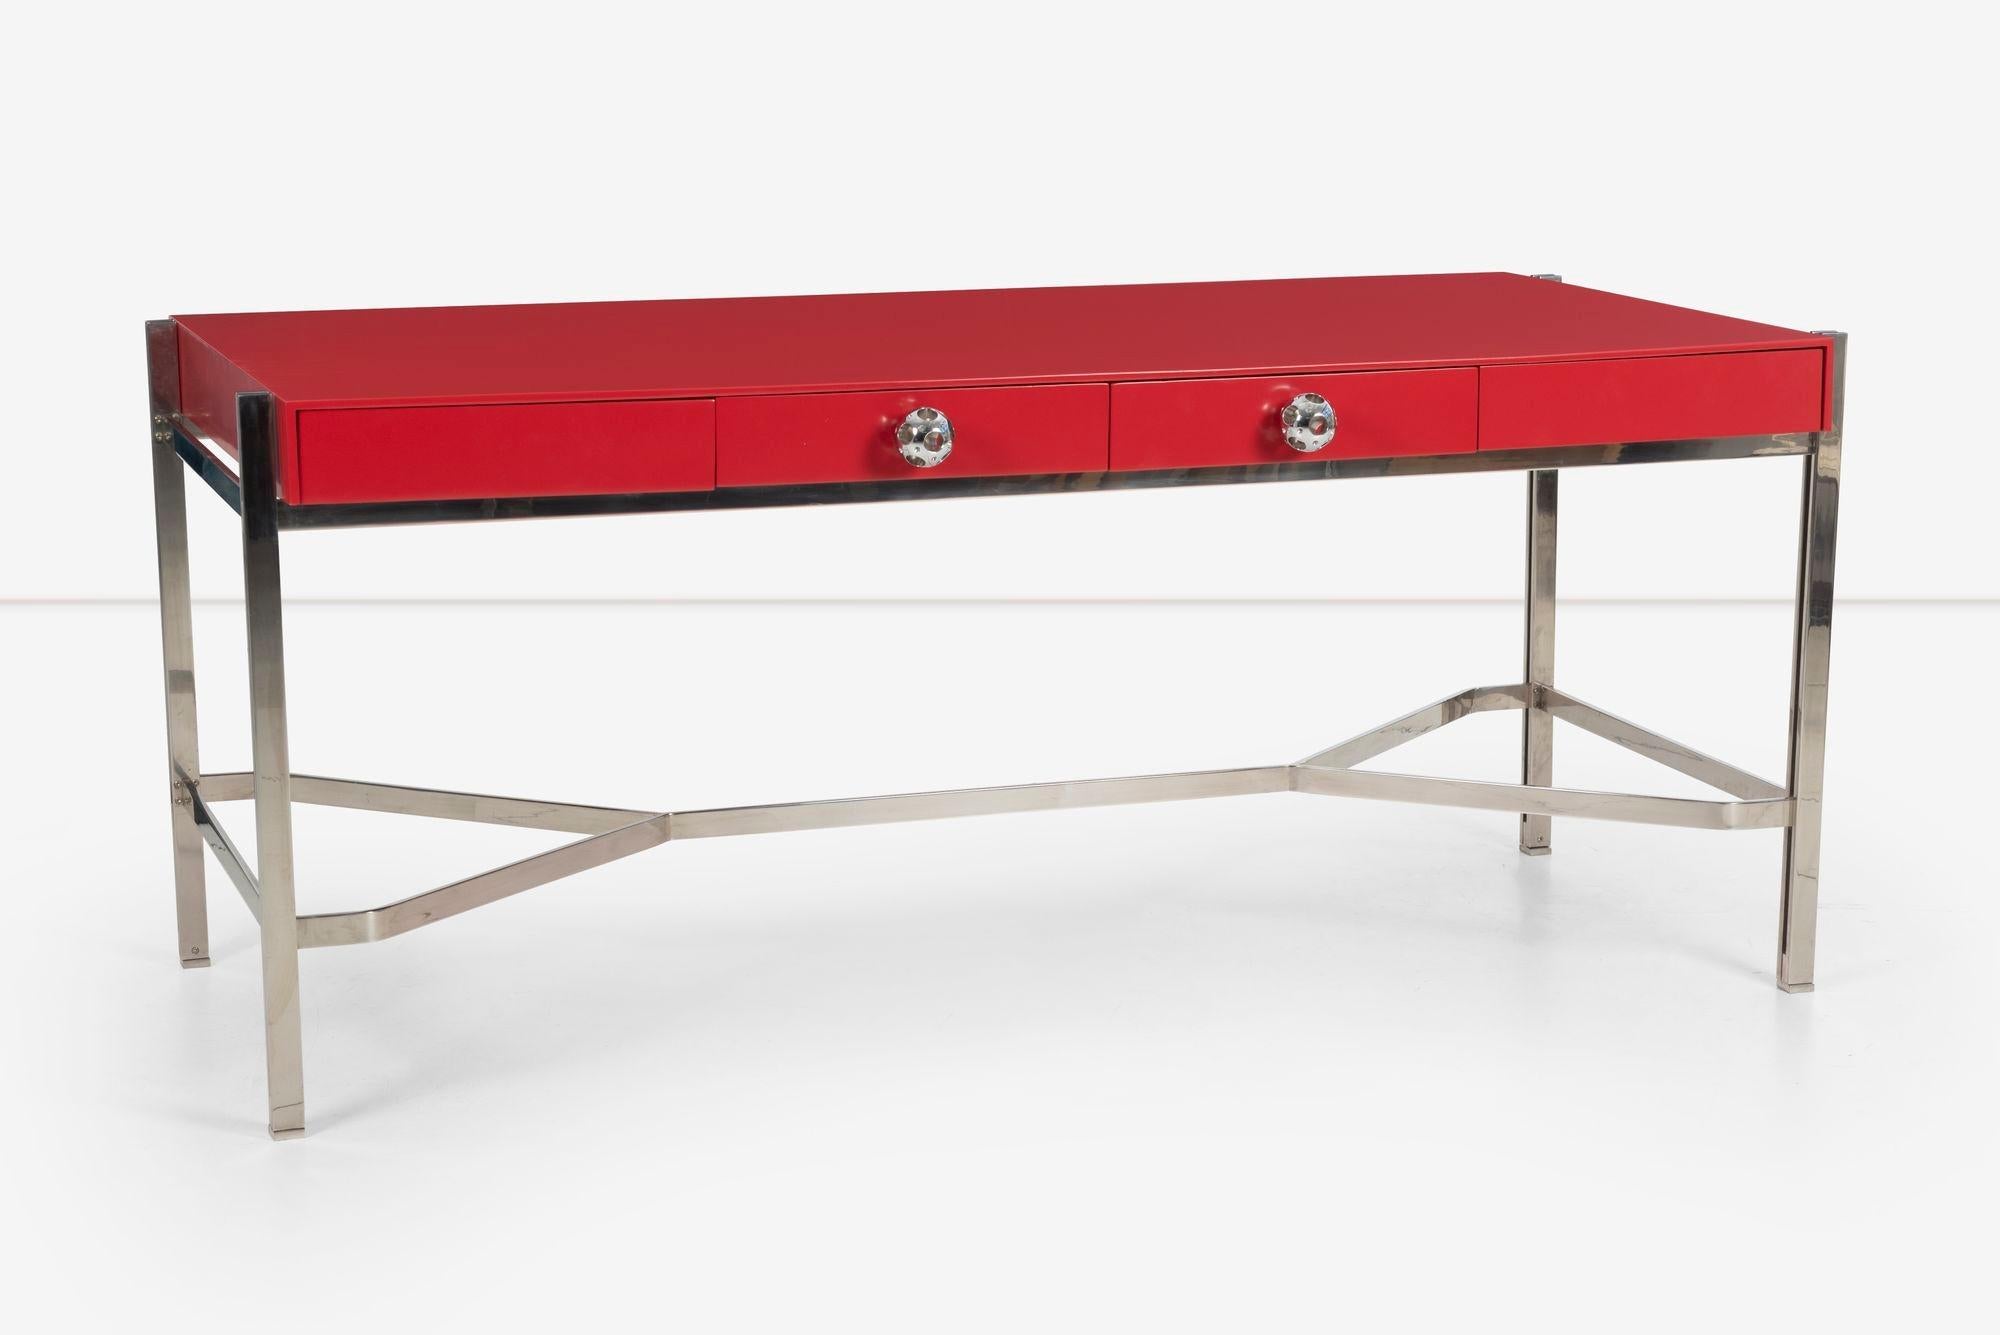 Arthur Elrod Custom desk, Manufactured by Pace; features a red lacquered Desk Top with three pencil drawers with solid perforated chrome plated pulls.
The frame is also chrome-plated steel.